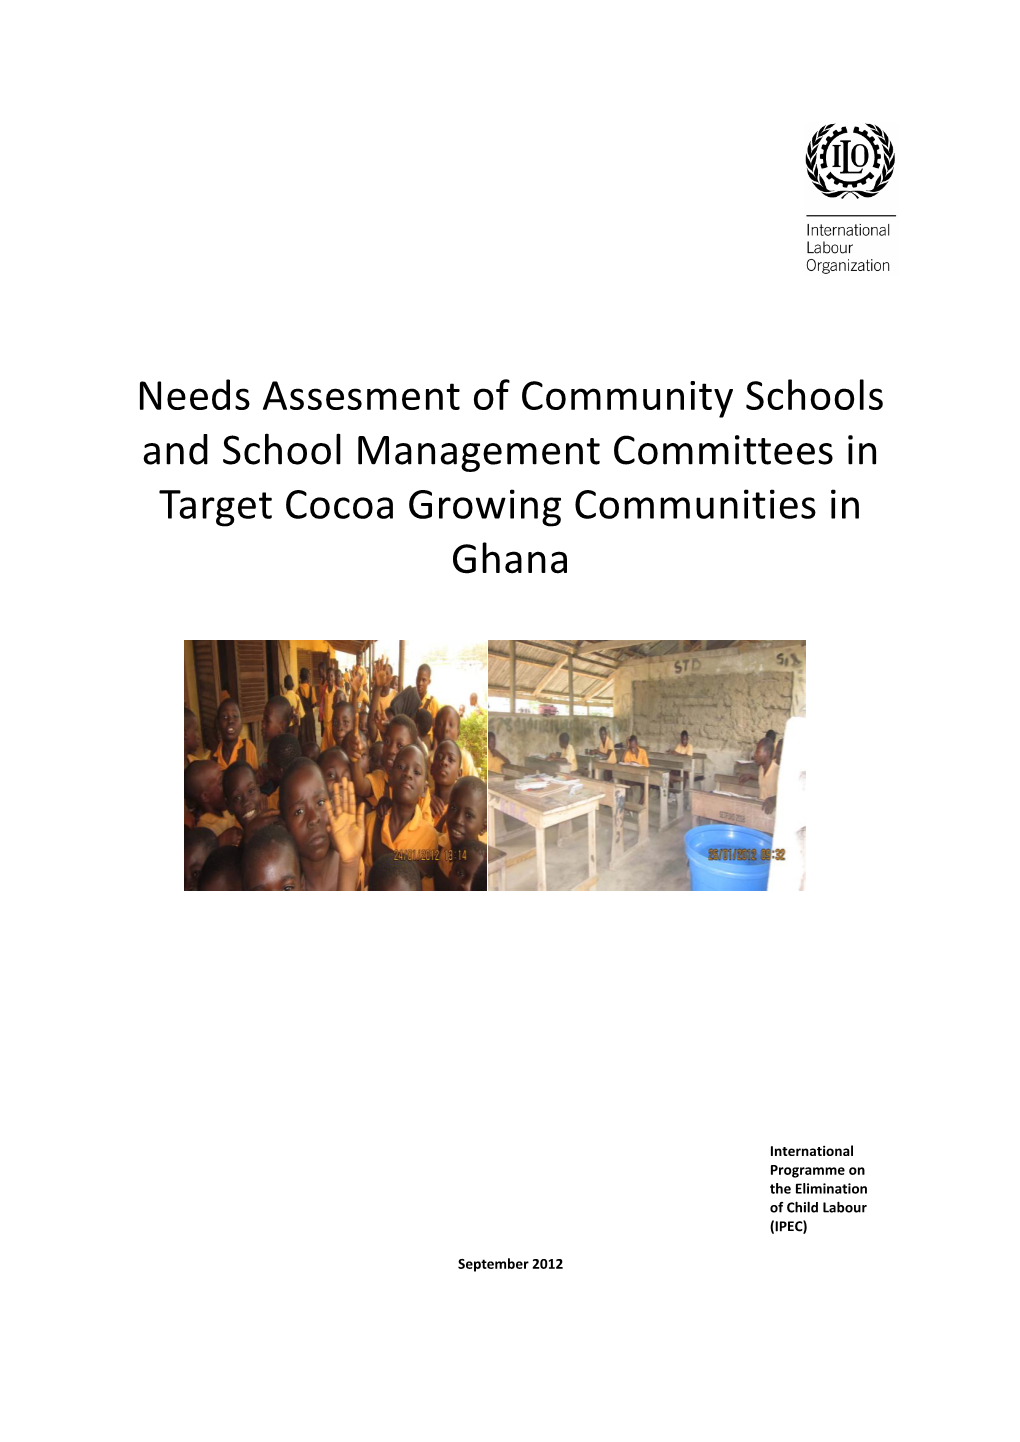 Needs Assesment of Community Schools and School Management Committees in Target Cocoa Growing Communities in Ghana